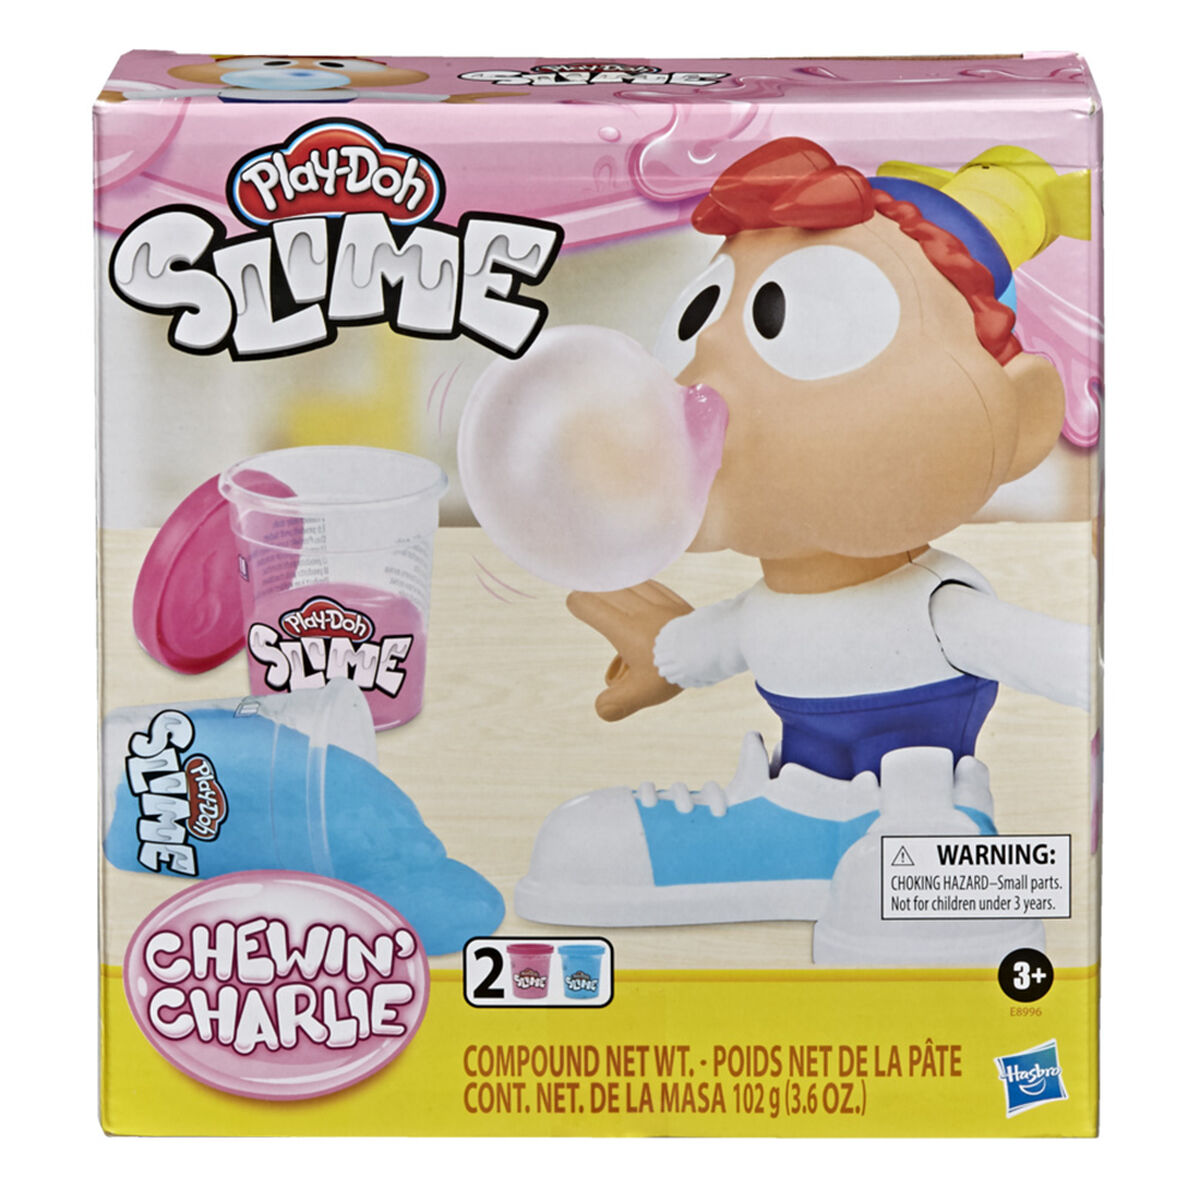 Play-Doh Slime - Chewin Charlie